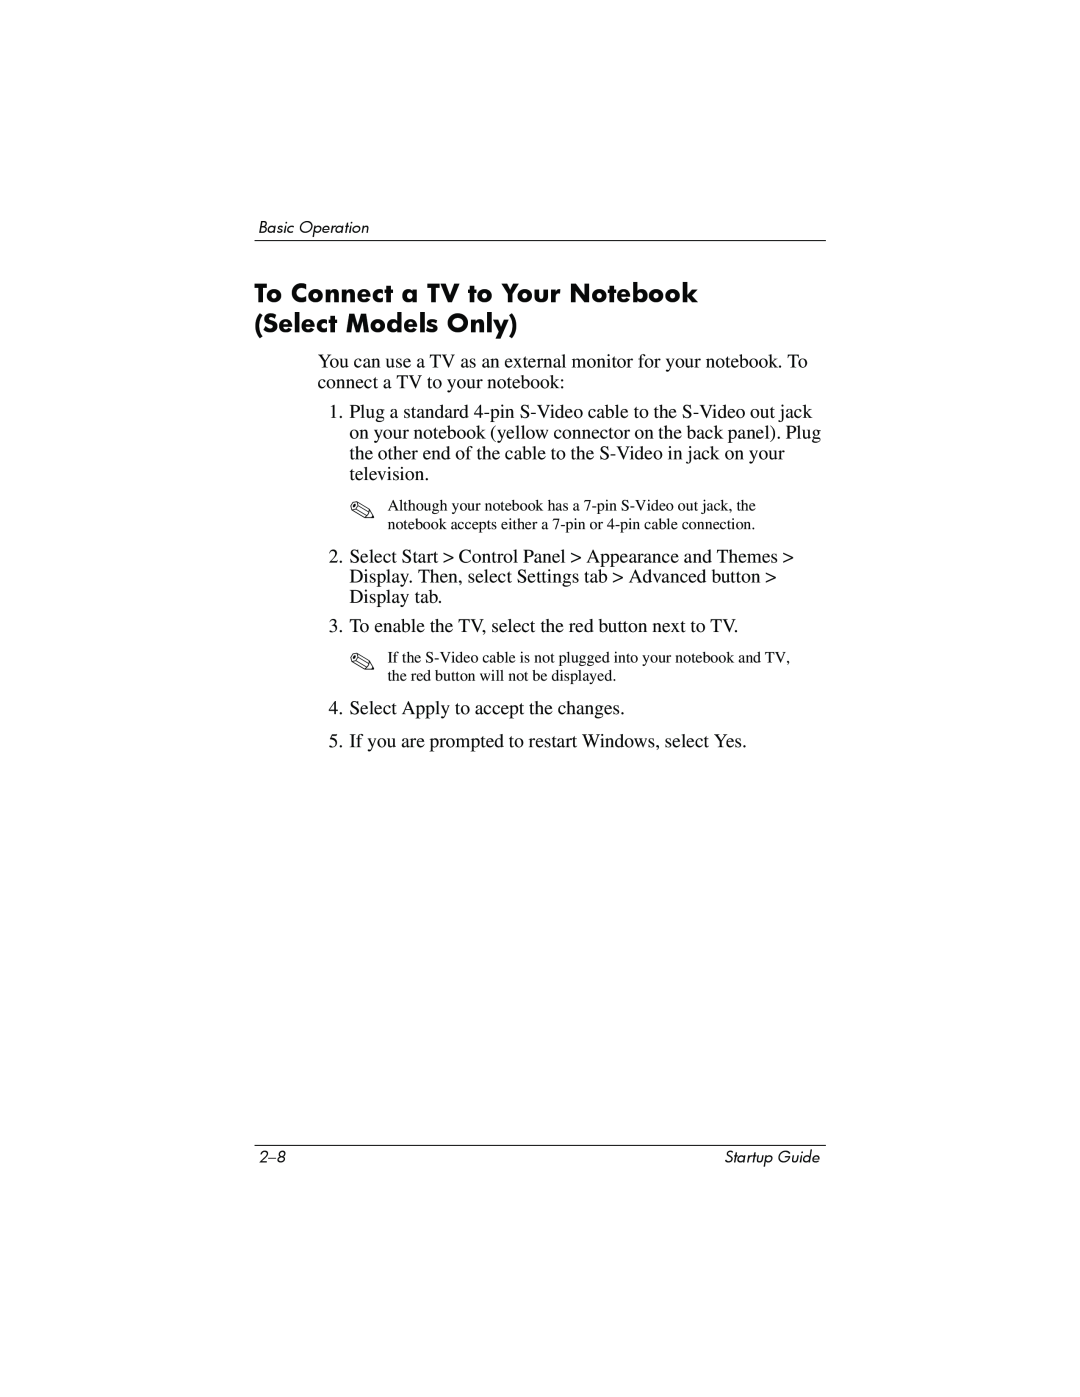 Compaq Personal Computer manual To Connect a TV to Your Notebook Select Models Only 